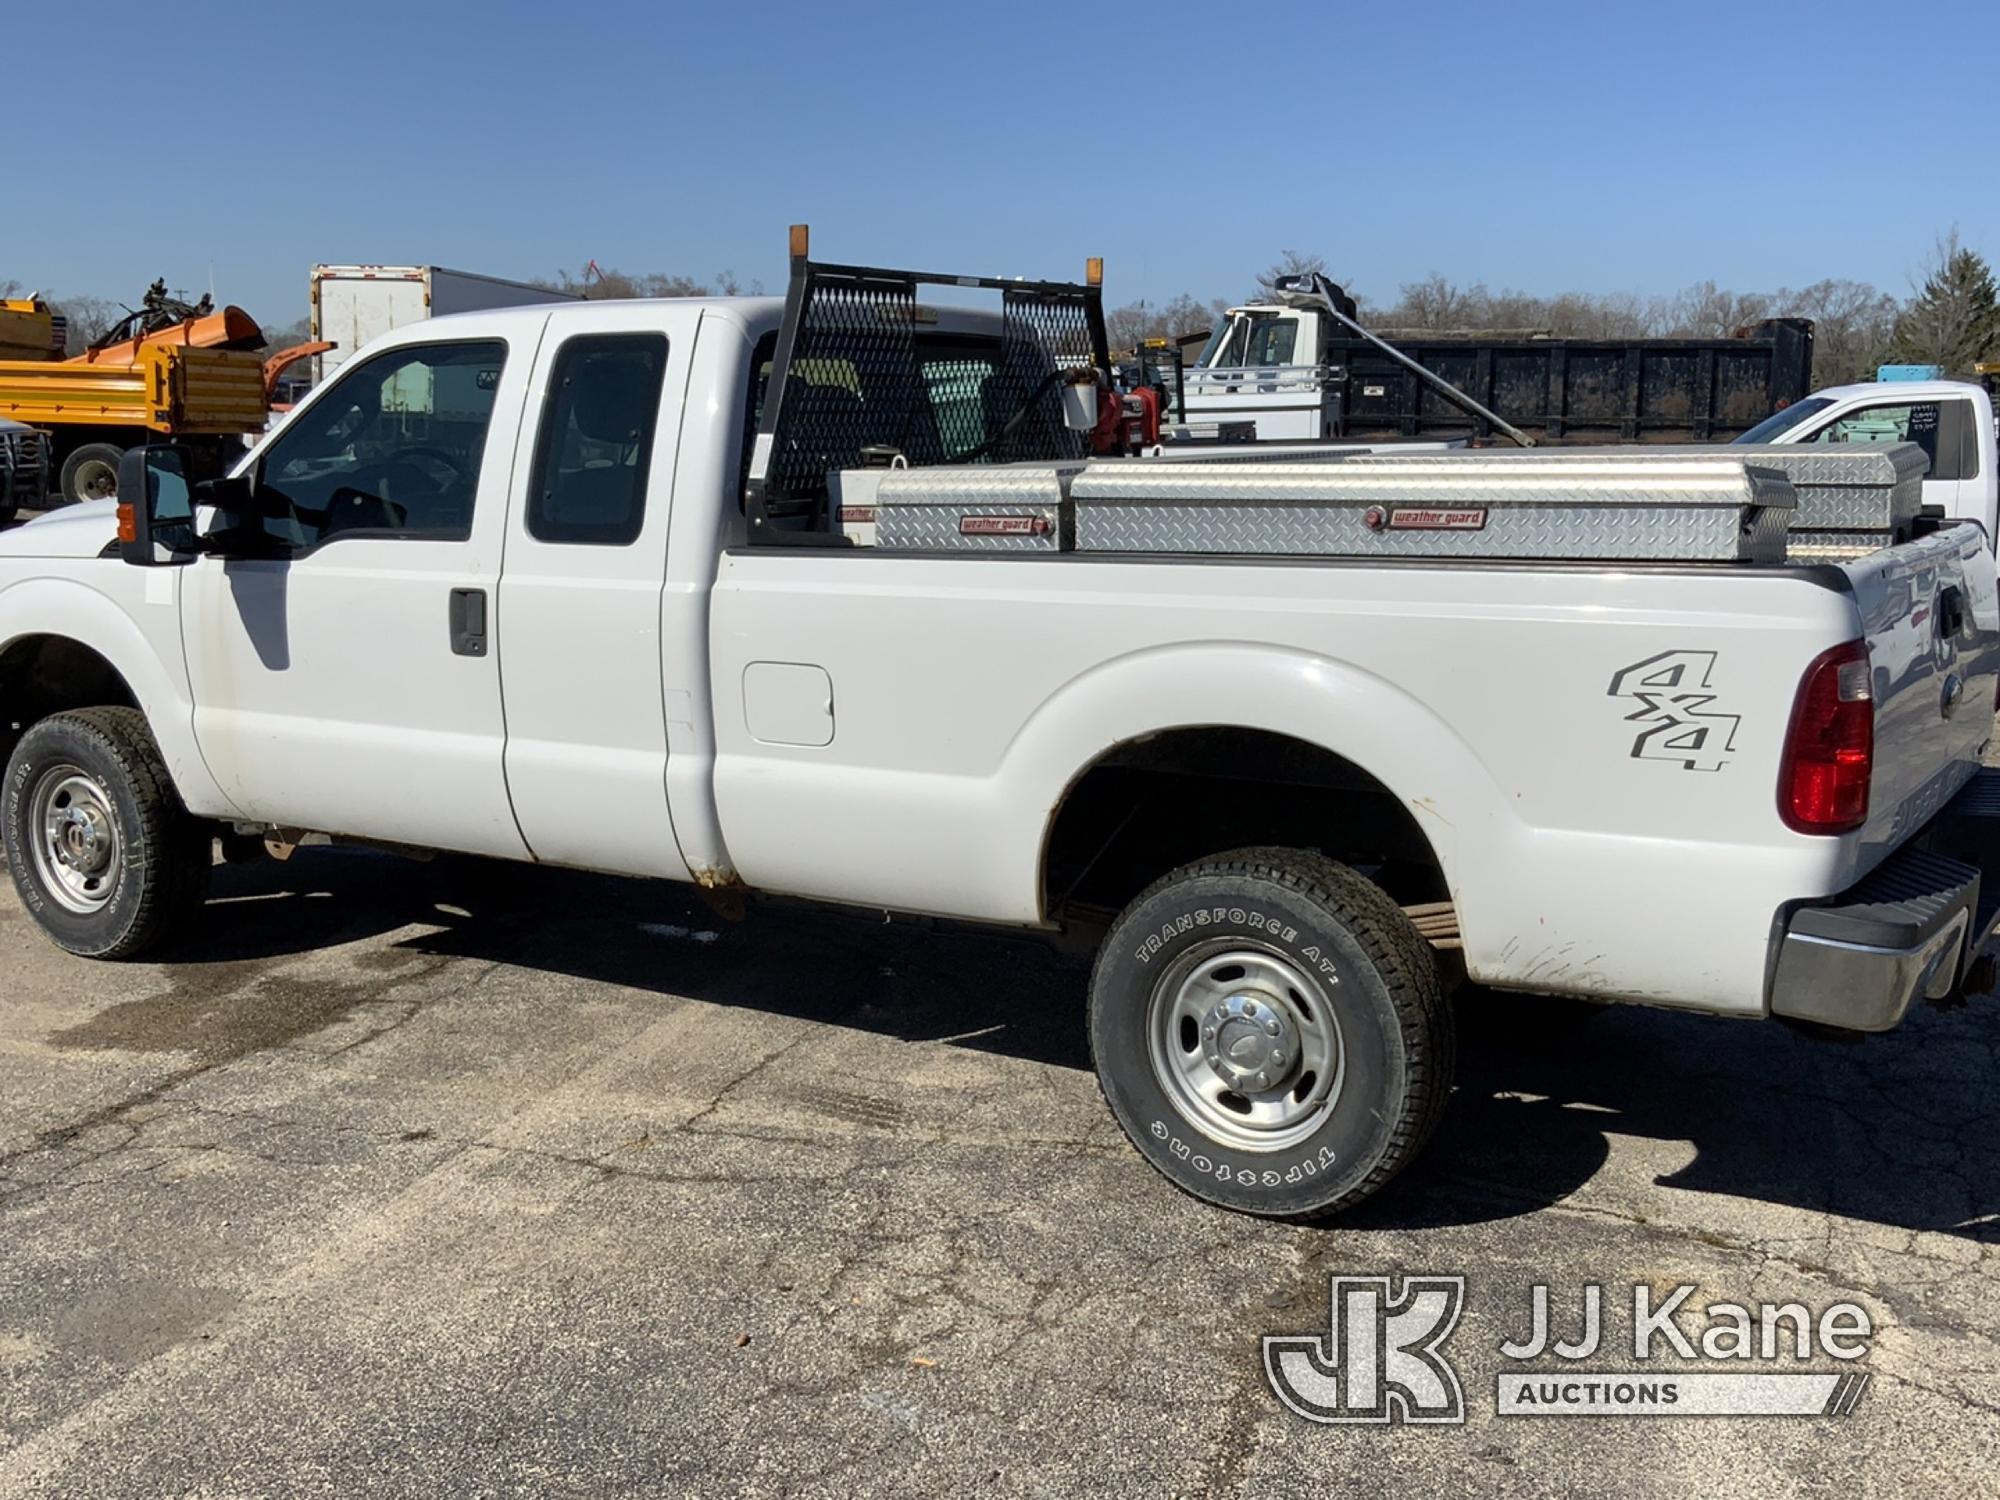 (South Beloit, IL) 2012 Ford F250 4x4 Extended-Cab Pickup Truck Runs & Moves